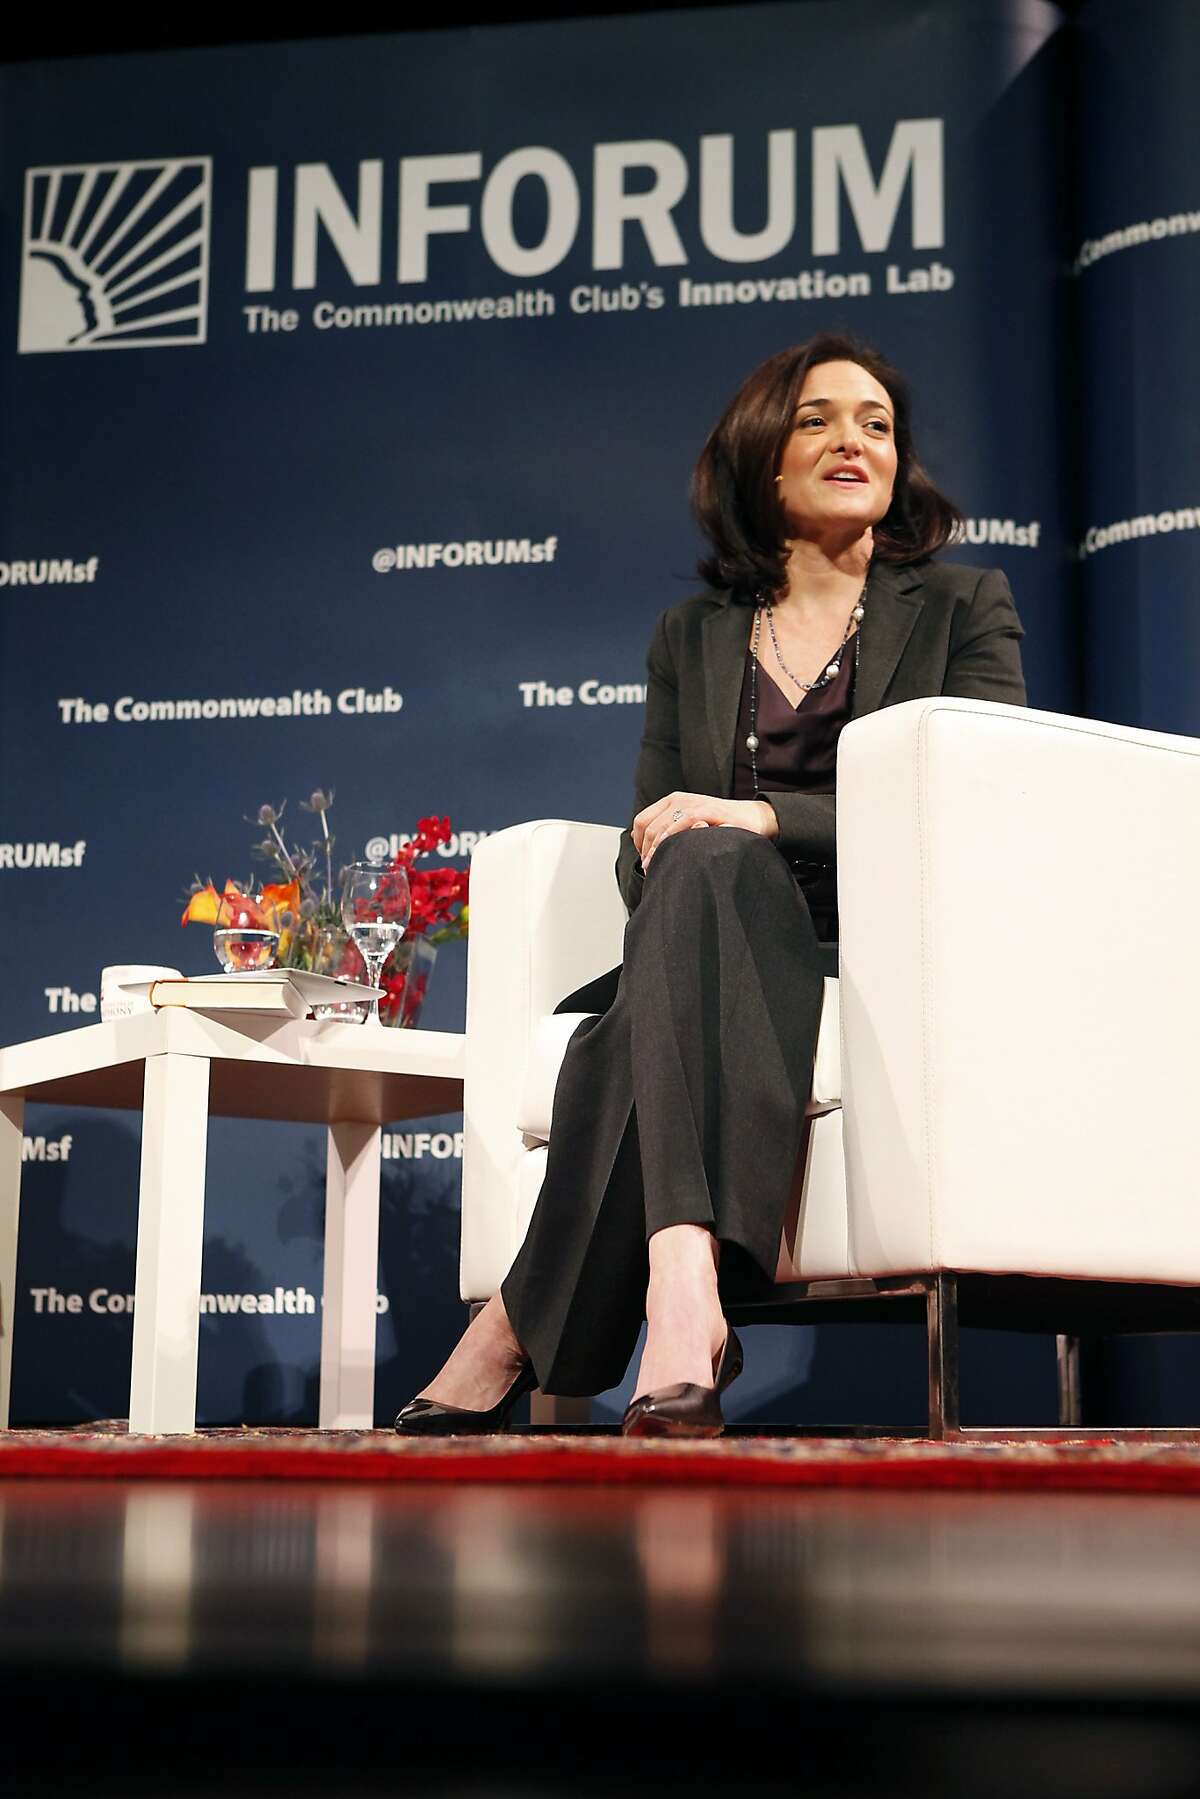 Sheryl Sandberg, right Facebook COO, answers a question from the crowd while interviewing Arianna Huffington, President and Editor-in-Chief of the Huffington Post Media Group, during a Commonwealth Club held forum entitled Redefining Success, at Davies Symphony Hall in San Francisco, CA, Thursday March 27, 2014.